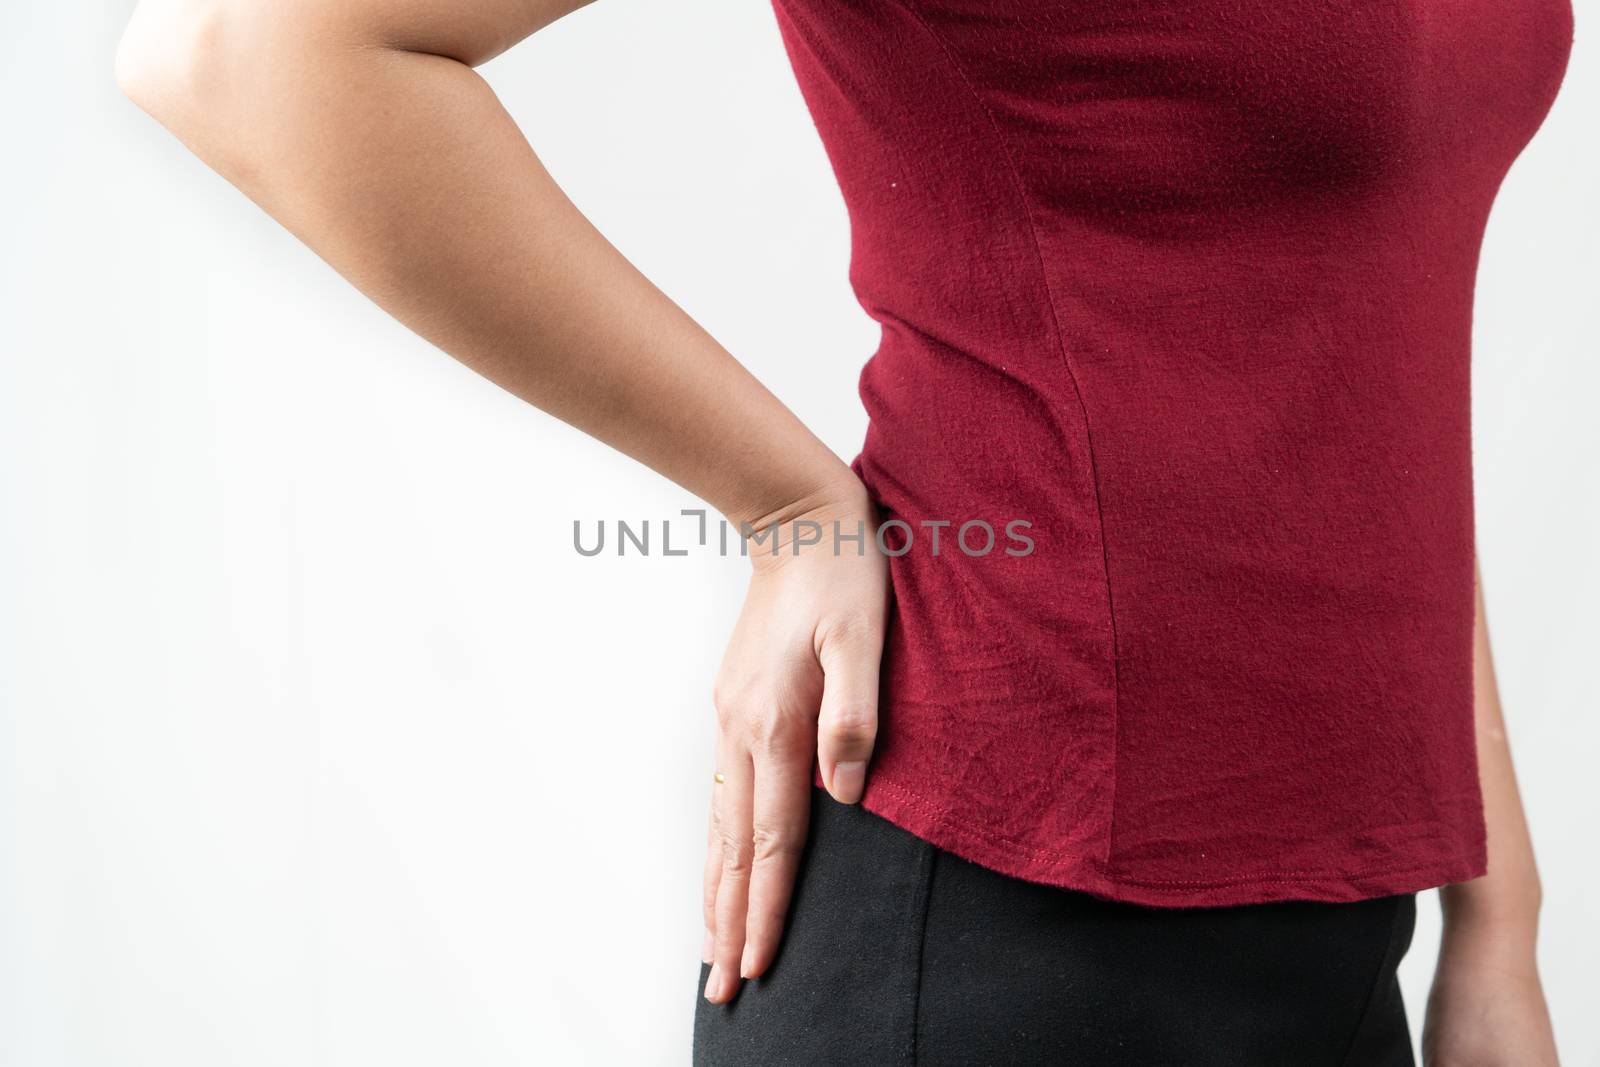 hip pain, women suffer from office syndrome. healthcare and medical concept